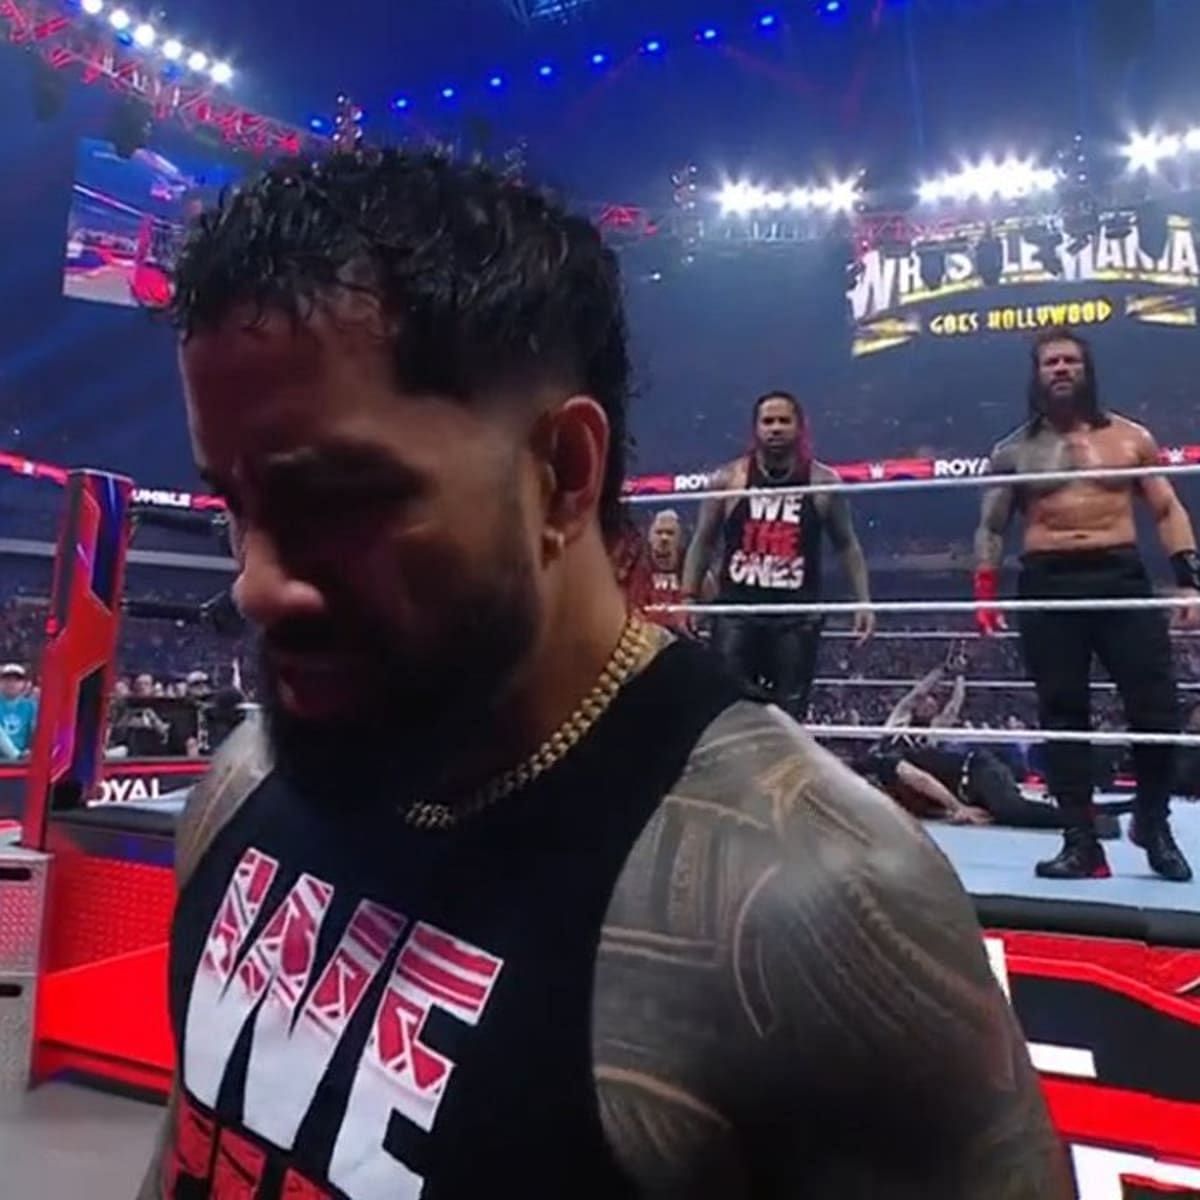 Could we see a return of Main Event Jey Uso if the Usos lose their titles?